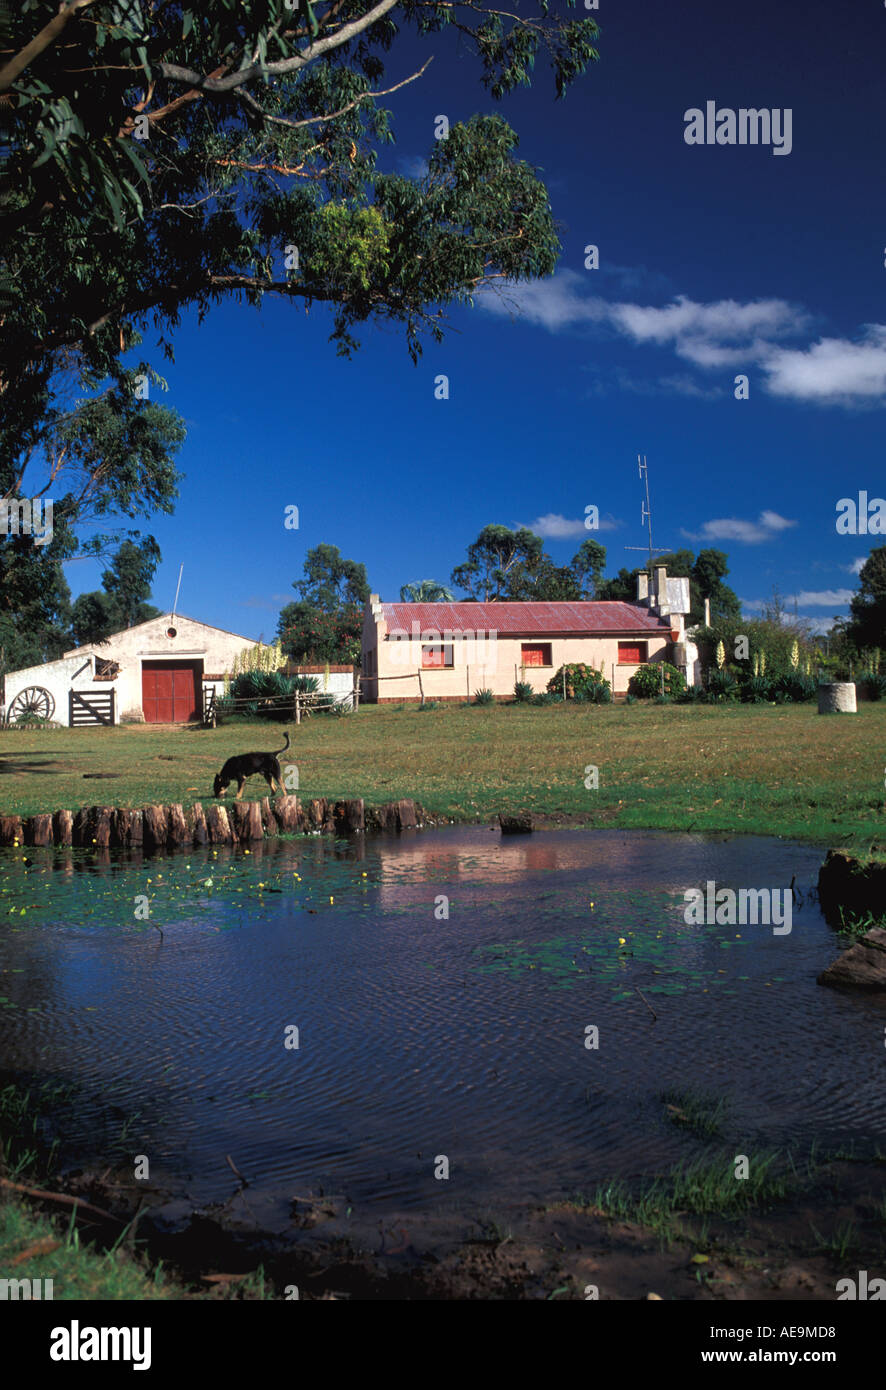 Uruguay South America Hacienda Ranch in the Country with pond Stock Photo